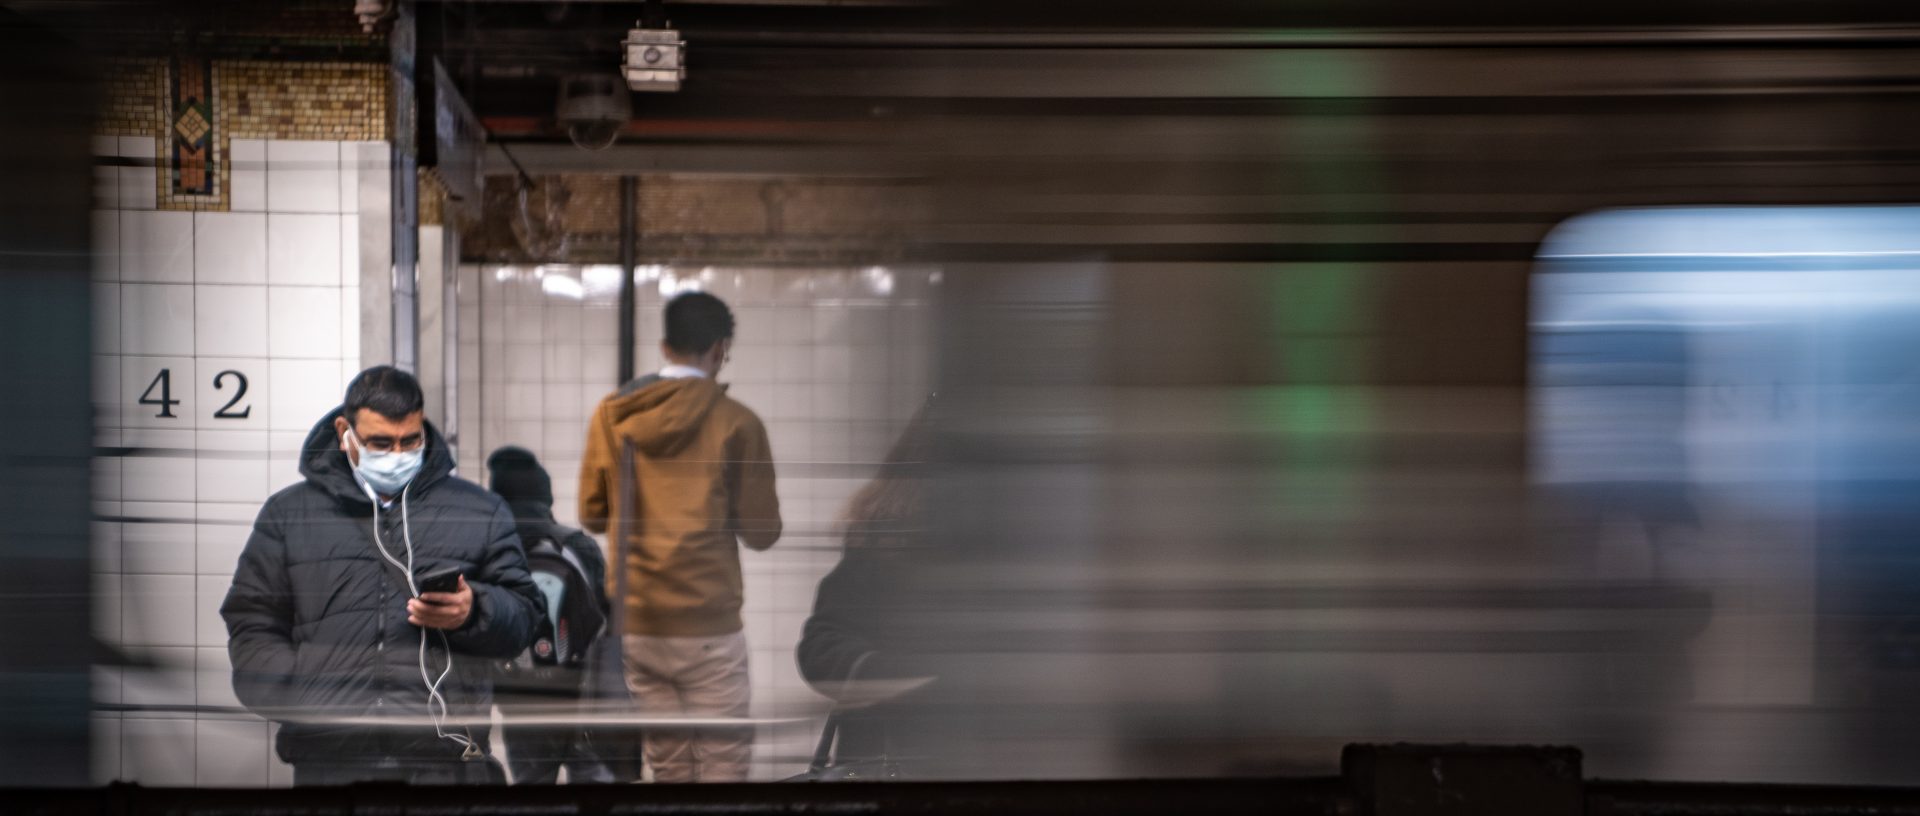 A commuter wearing a medical mask waits for a train Thursday at Grand Central station in New York City. Several dozen cases have been confirmed in the state, and the East Coast as a whole saw its first two confirmed deaths related to COVID-19, in Florida.